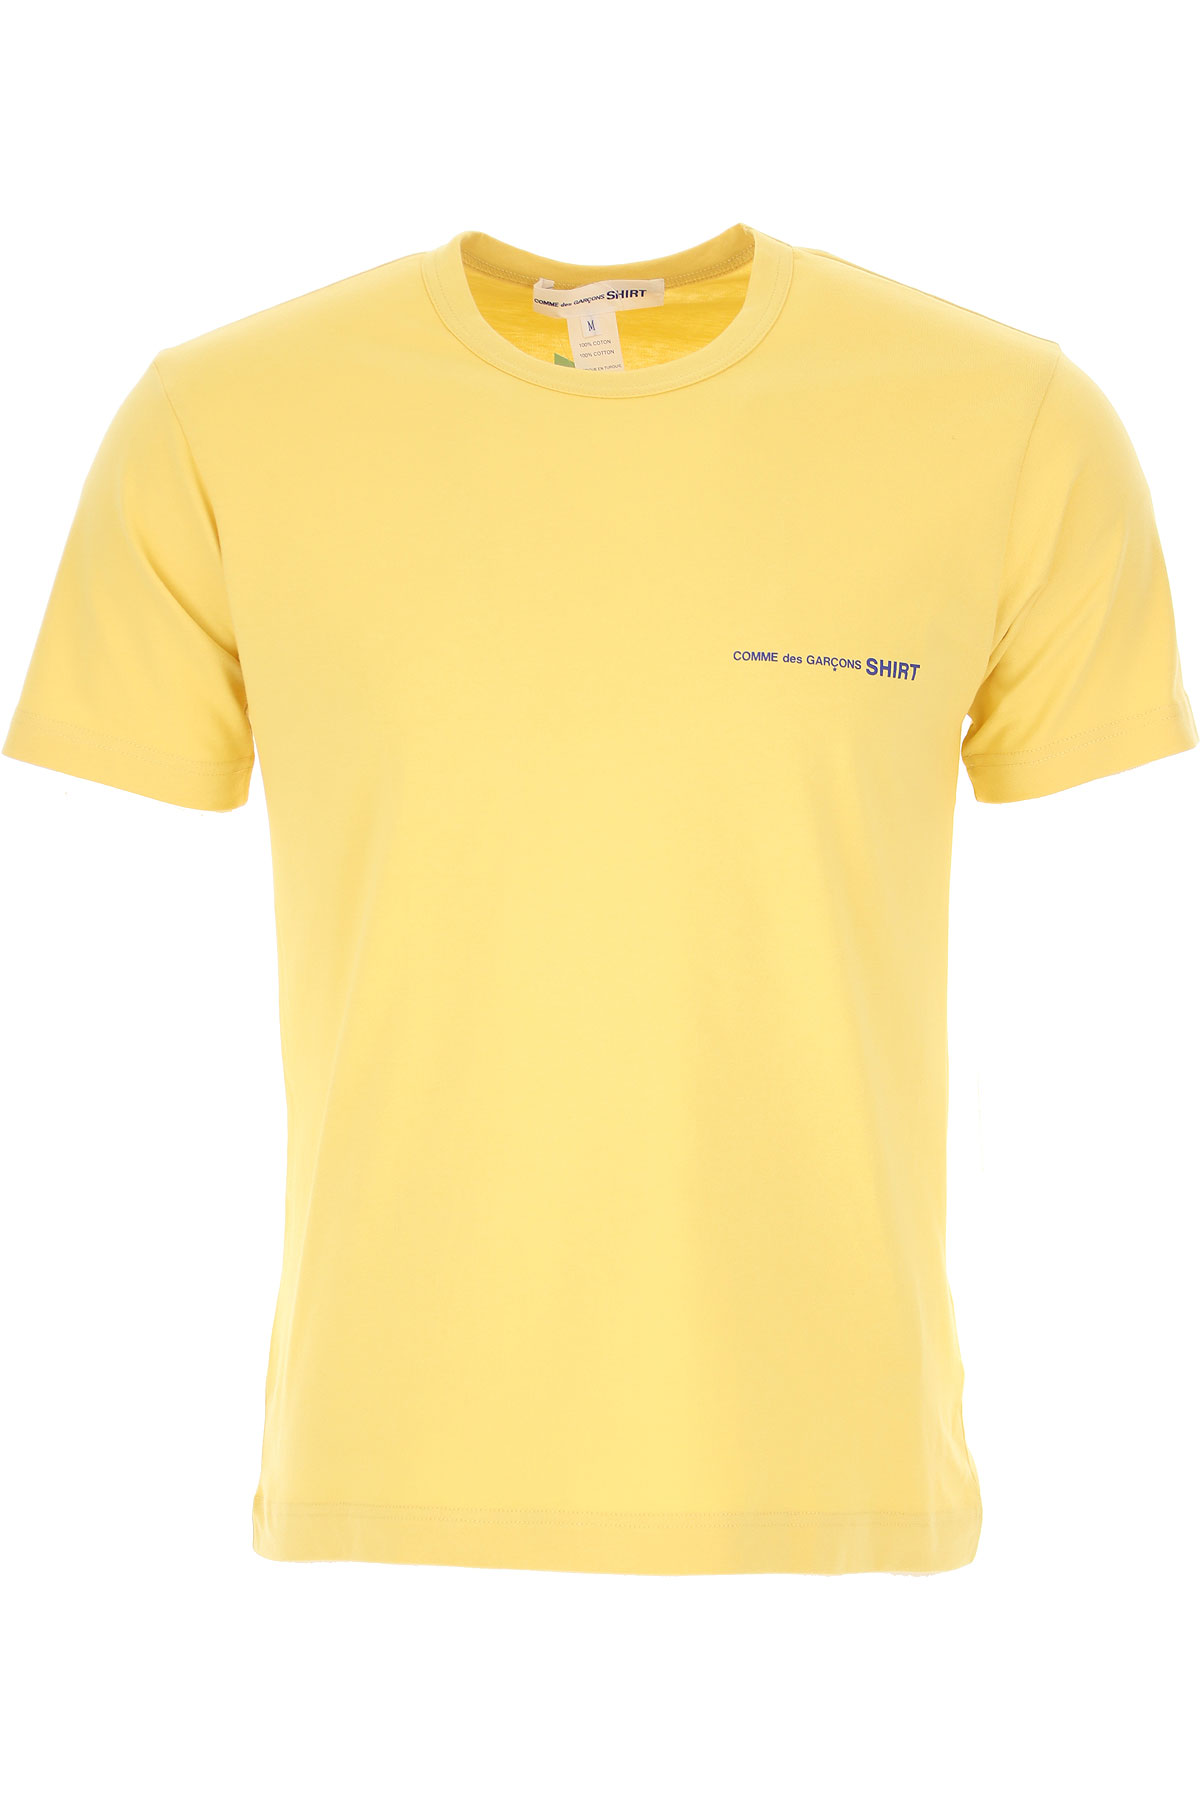 Mens Clothing Comme des Garcons, Style code: tgt020-yellow-